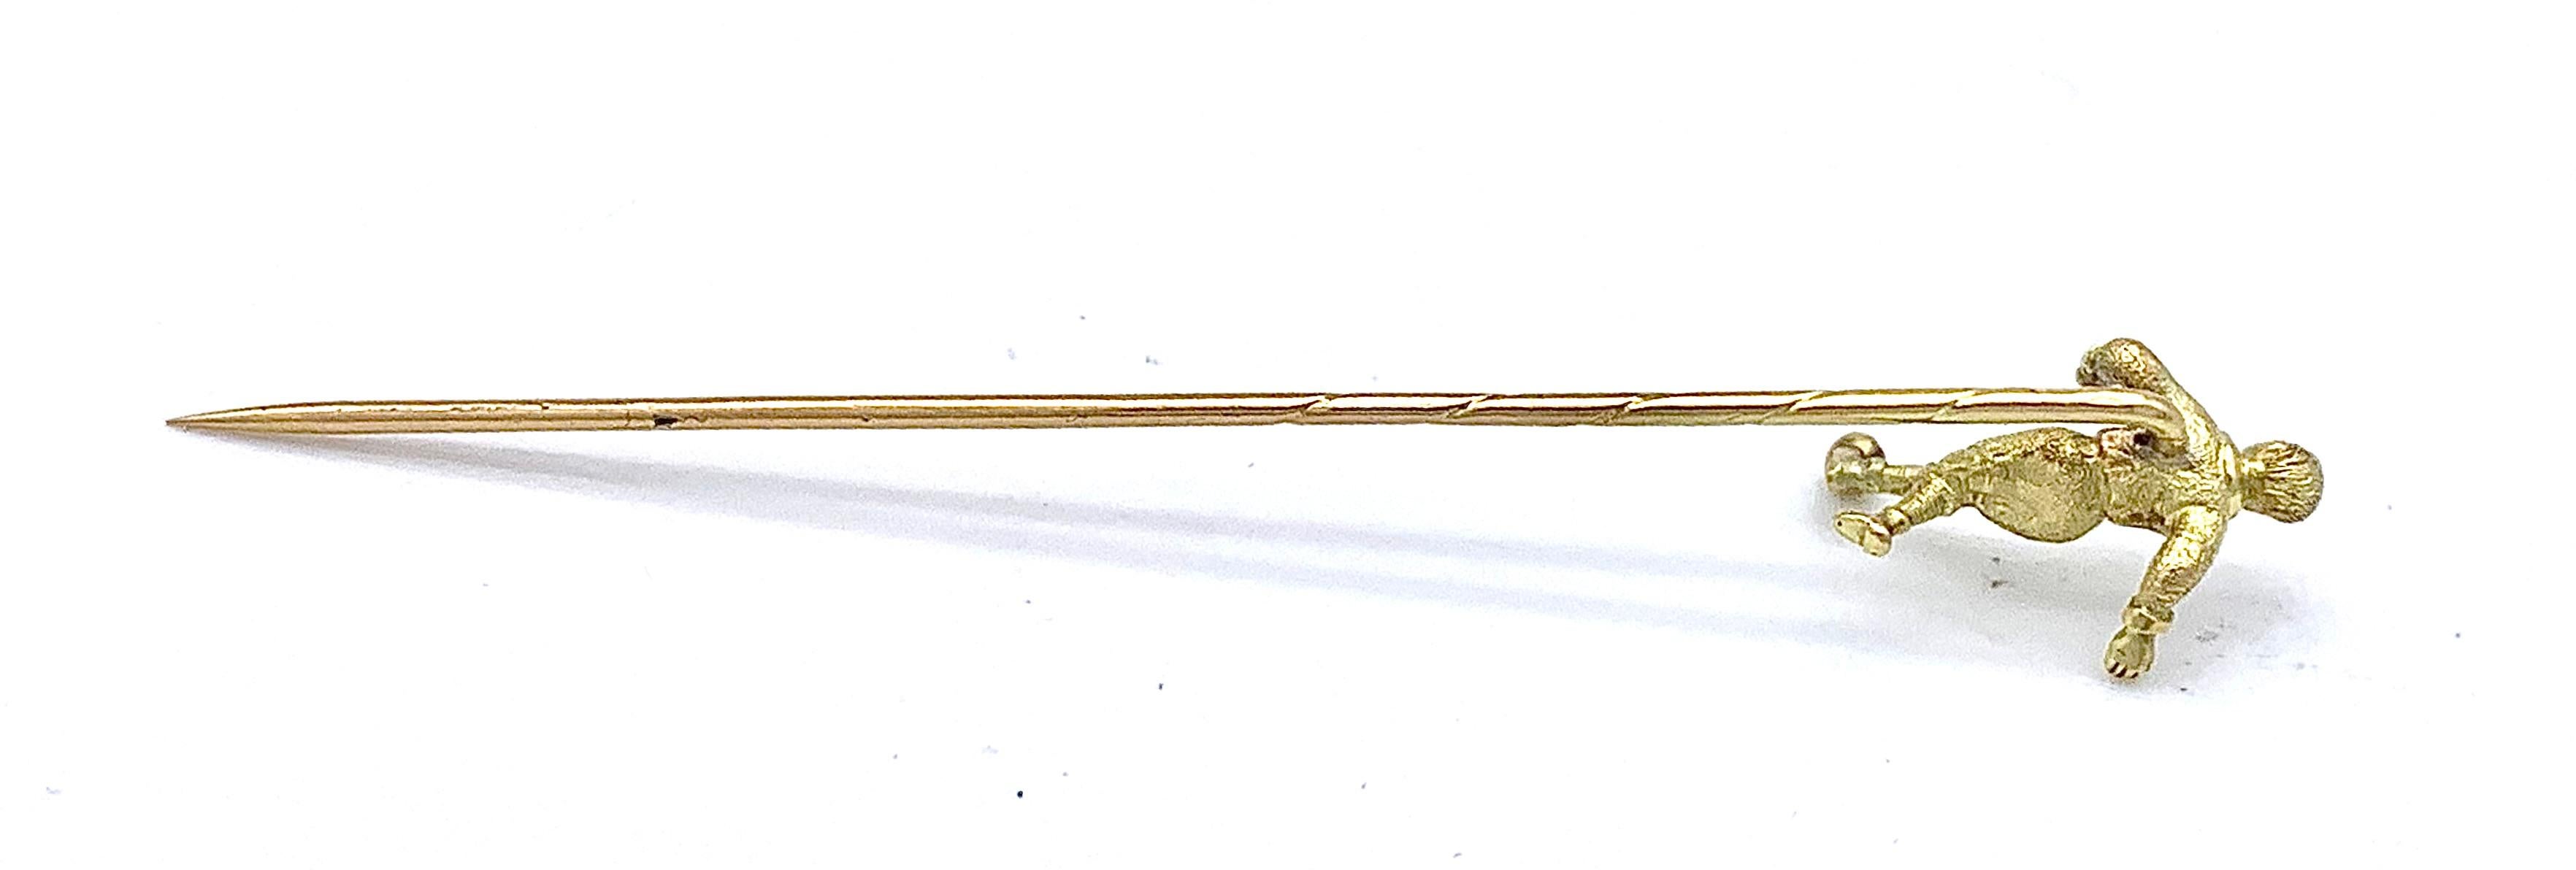 Antique Tie Pin Stick Pin Soccer Player Football Player 14 Karat Gold In Good Condition For Sale In Munich, Bavaria